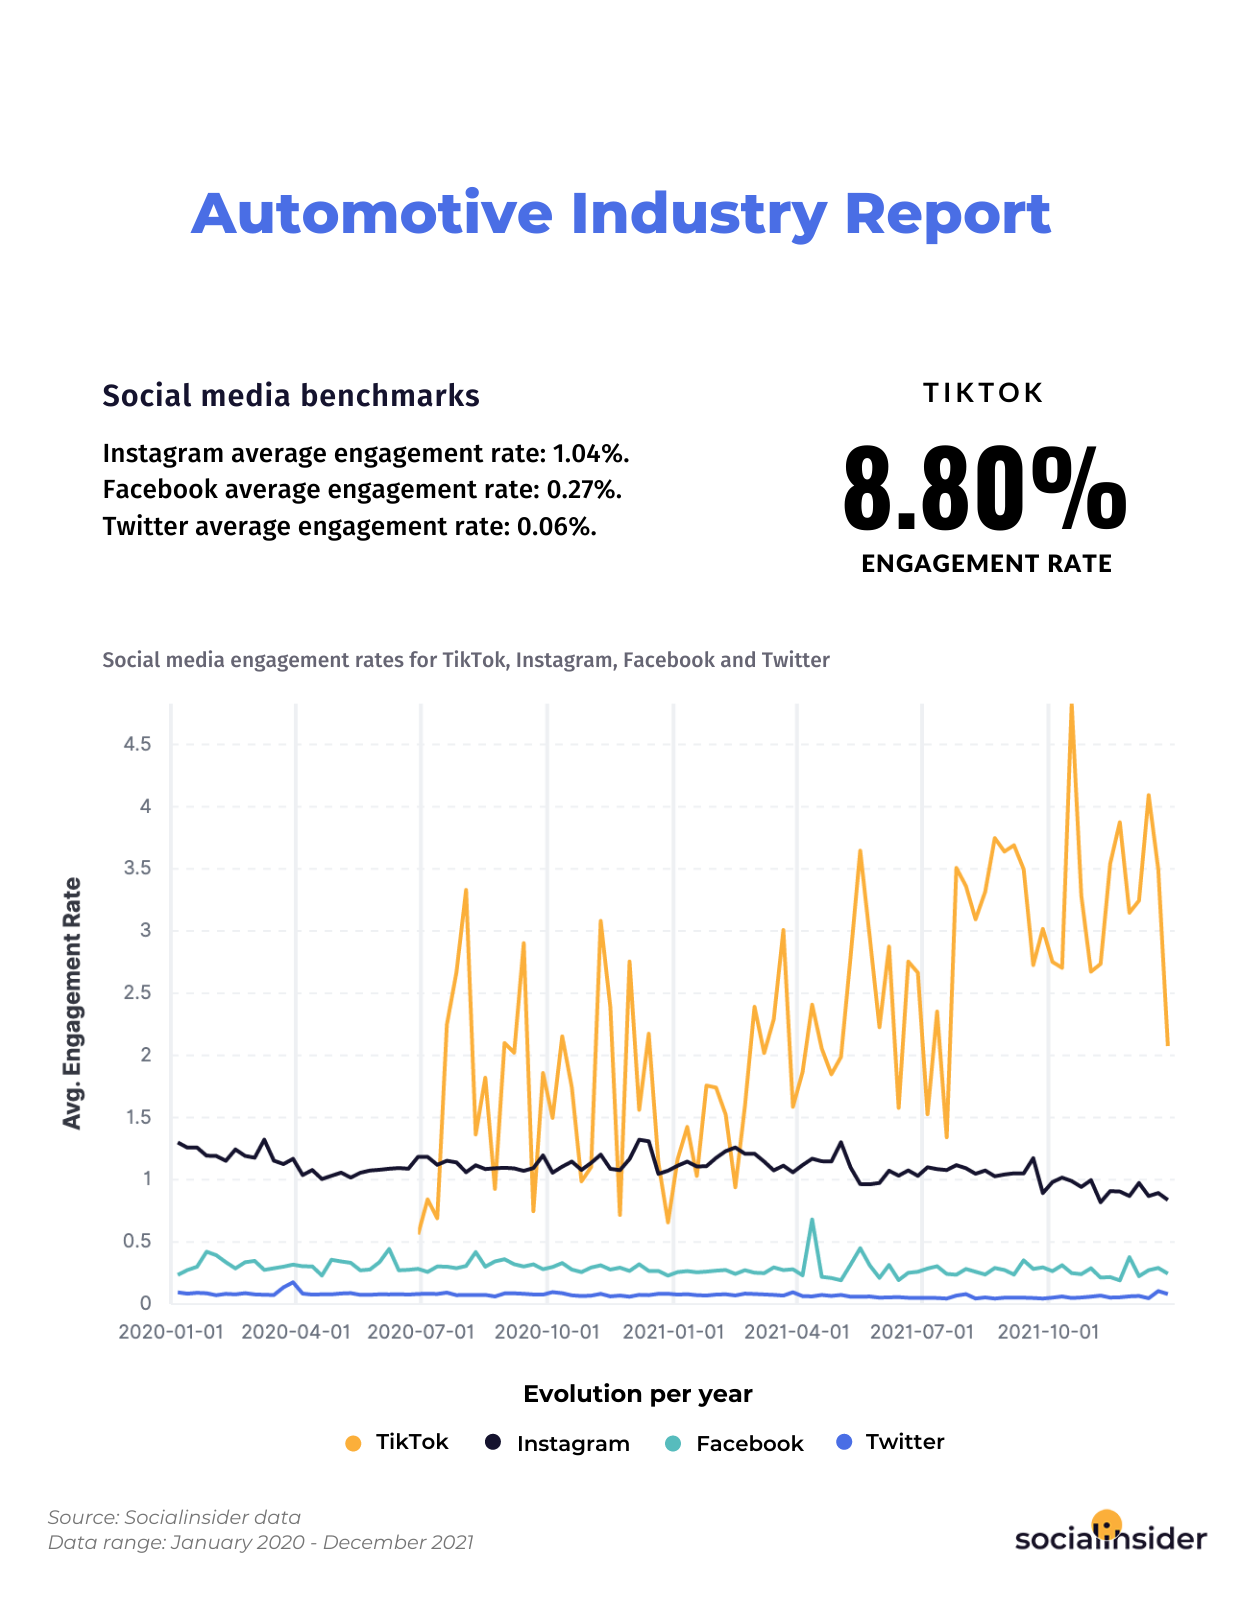 Engagement rates for the automotive industry in 2022